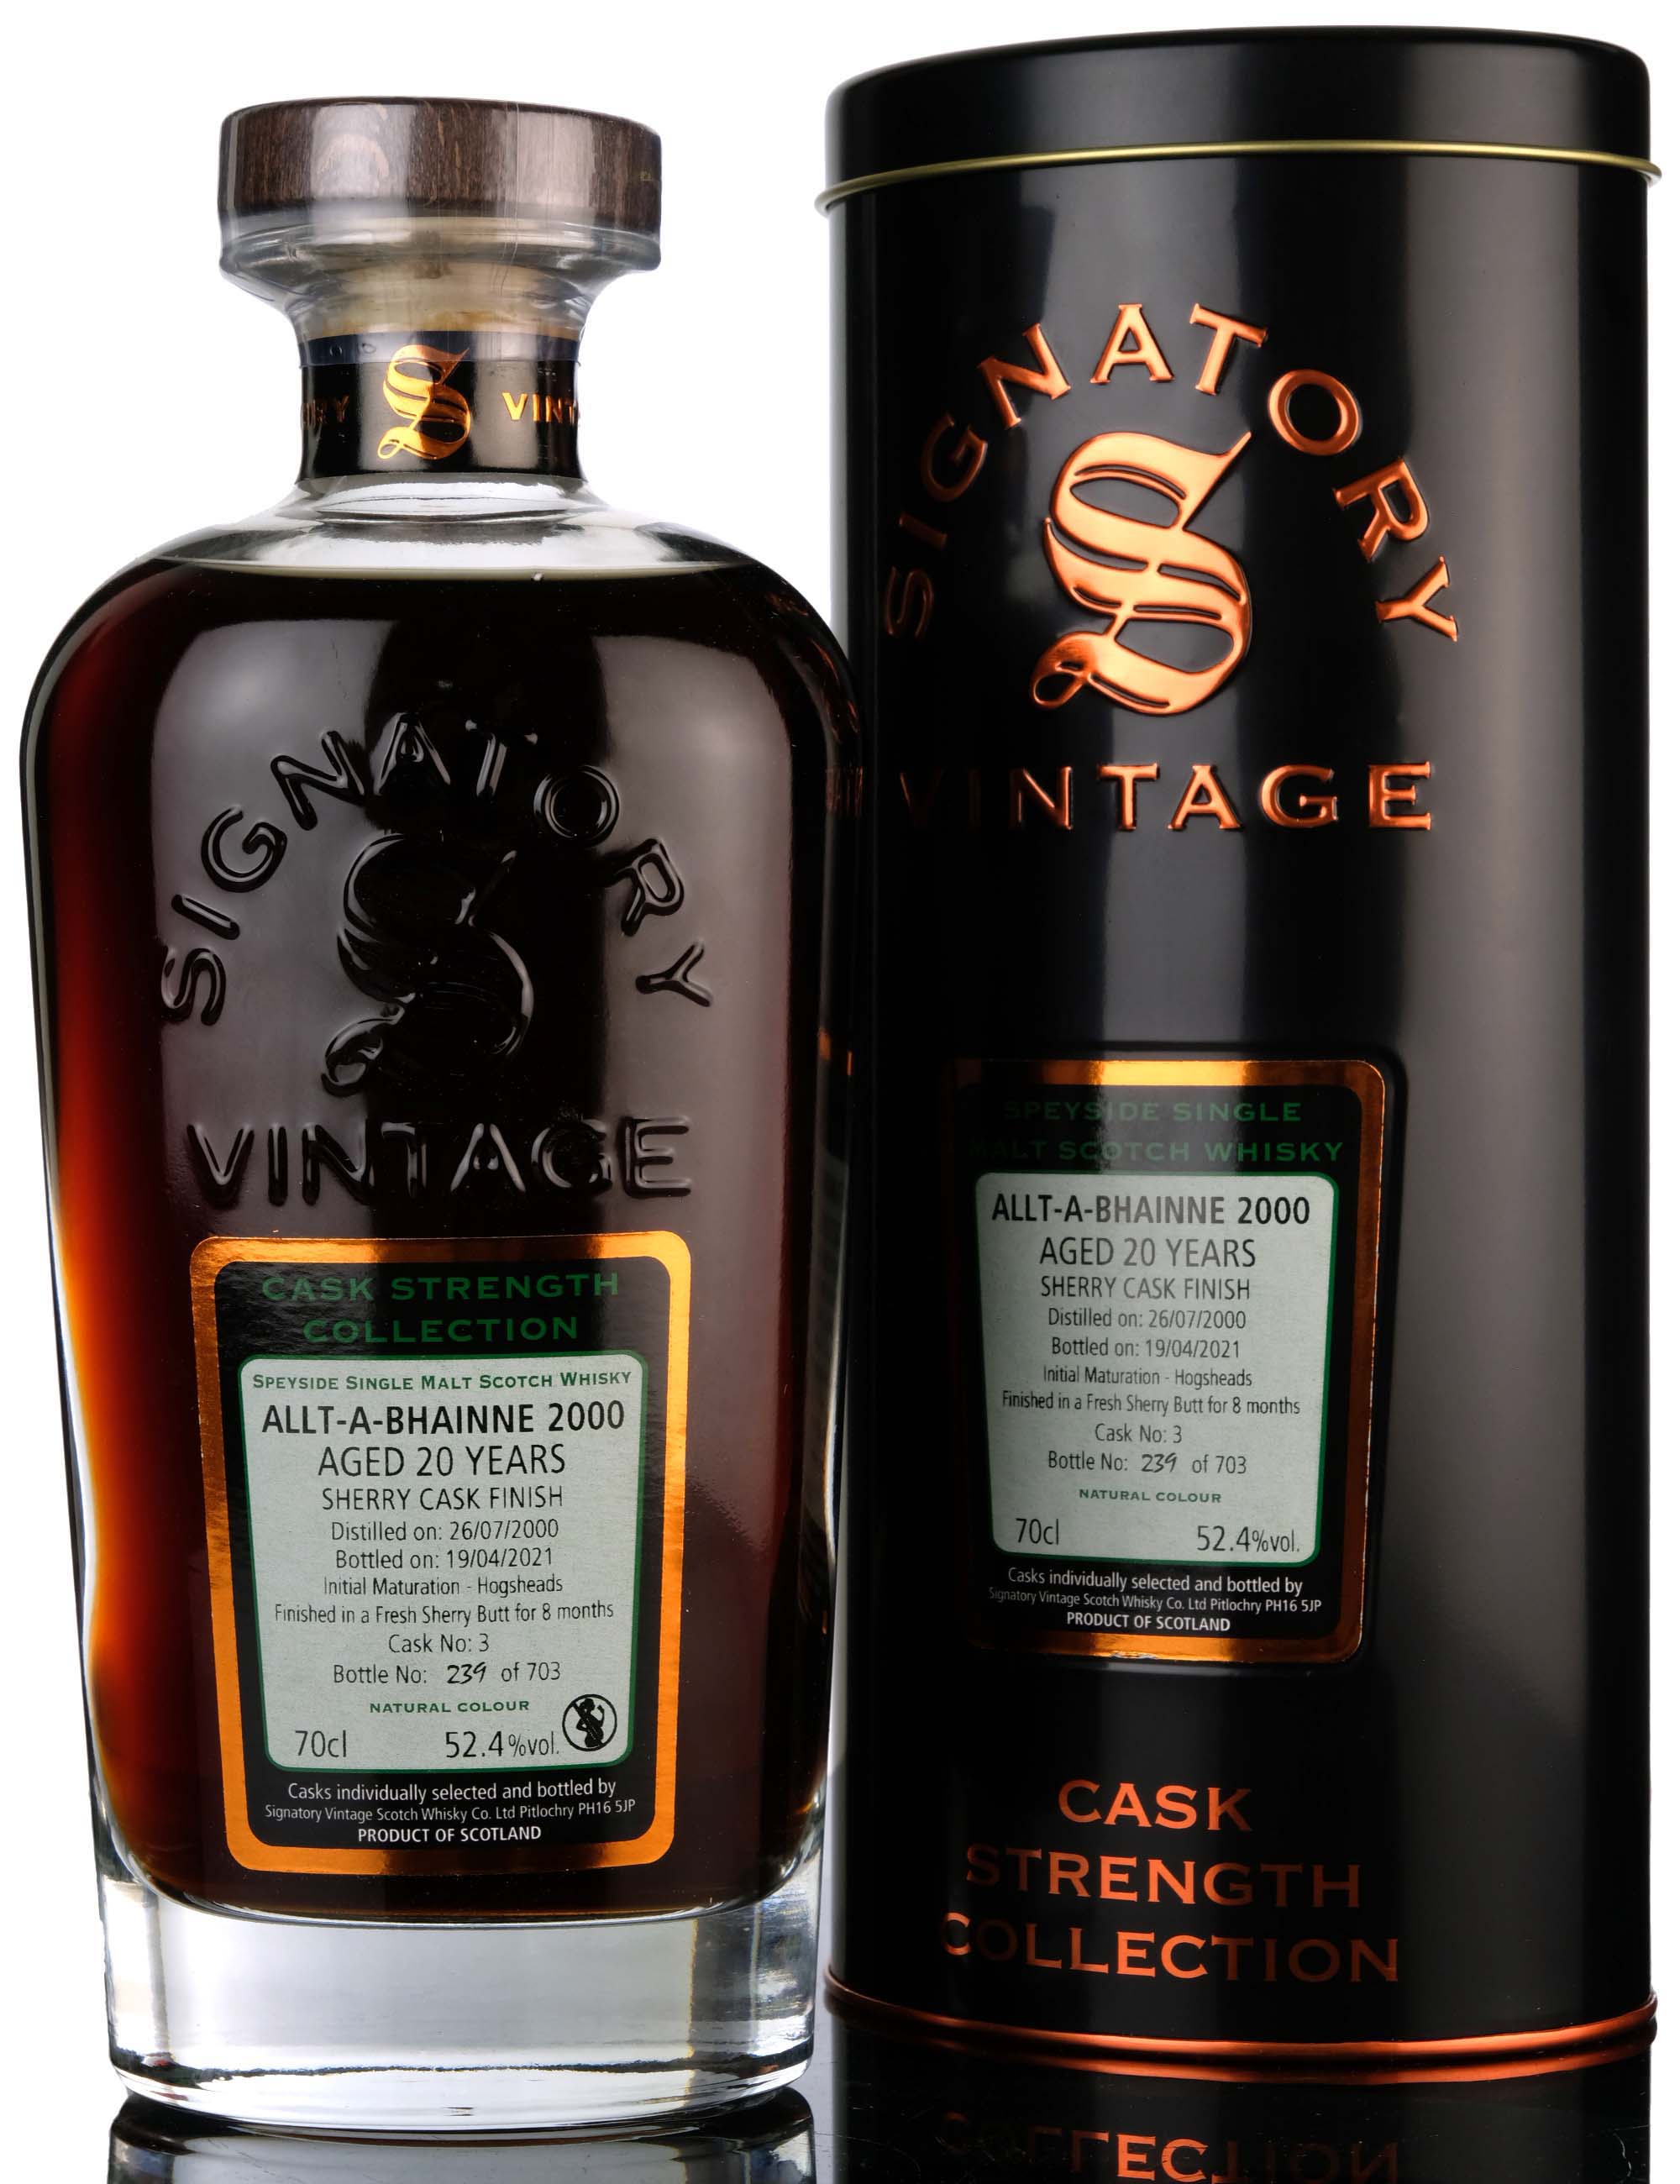 Allt-A-Bhainne 2000-2021 - 20 Year Old - Signatory Vintage Cask Strength Collection - Sing